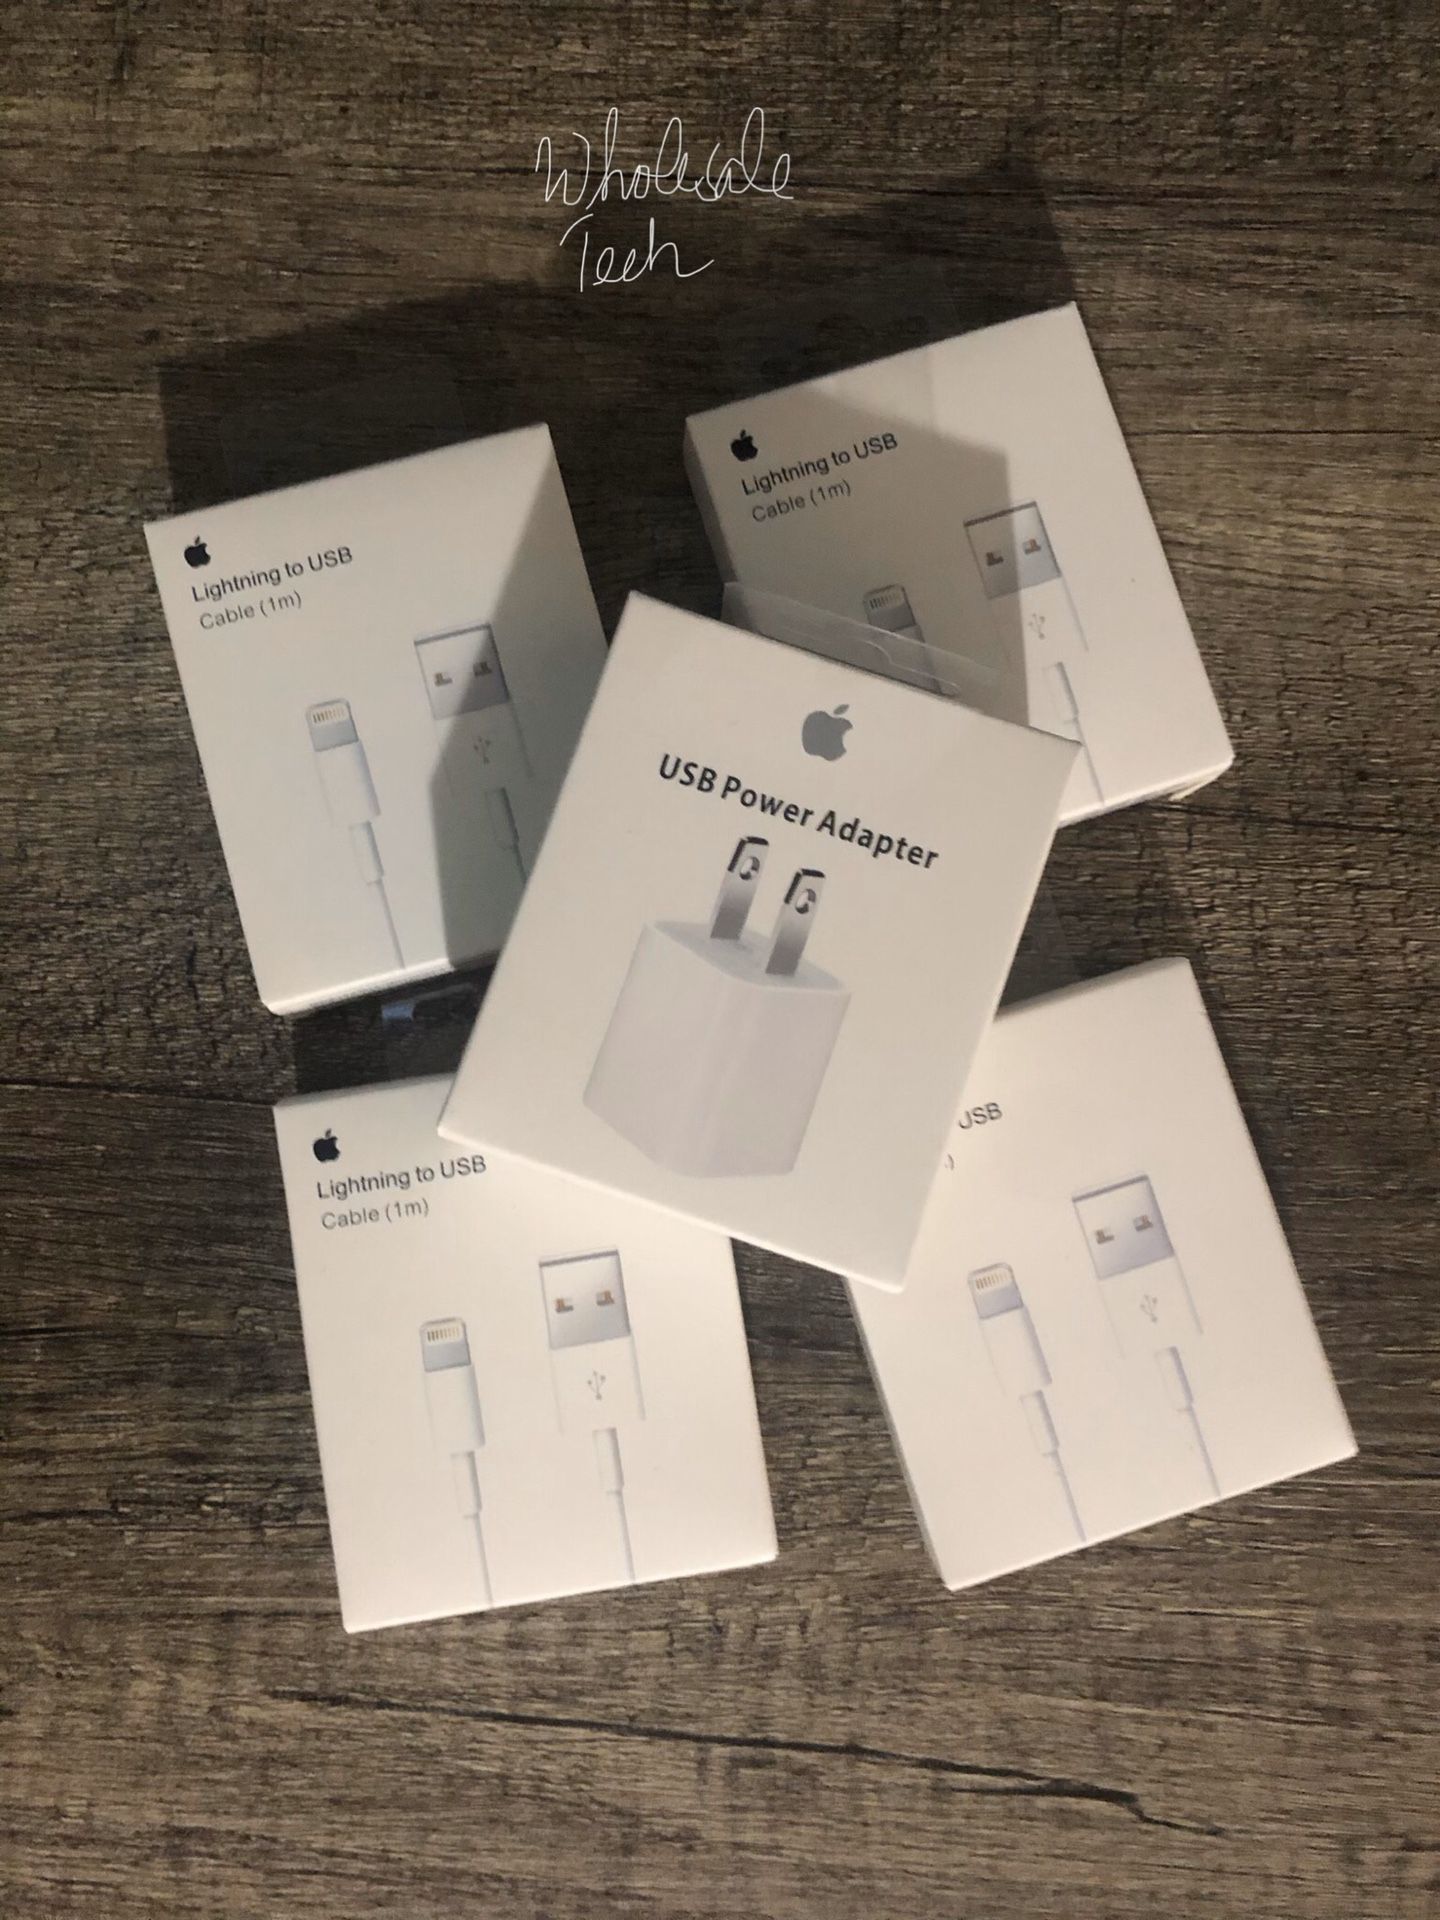 4 Original iPhone 1m Apple Chargers & 1 USB Power Adapter